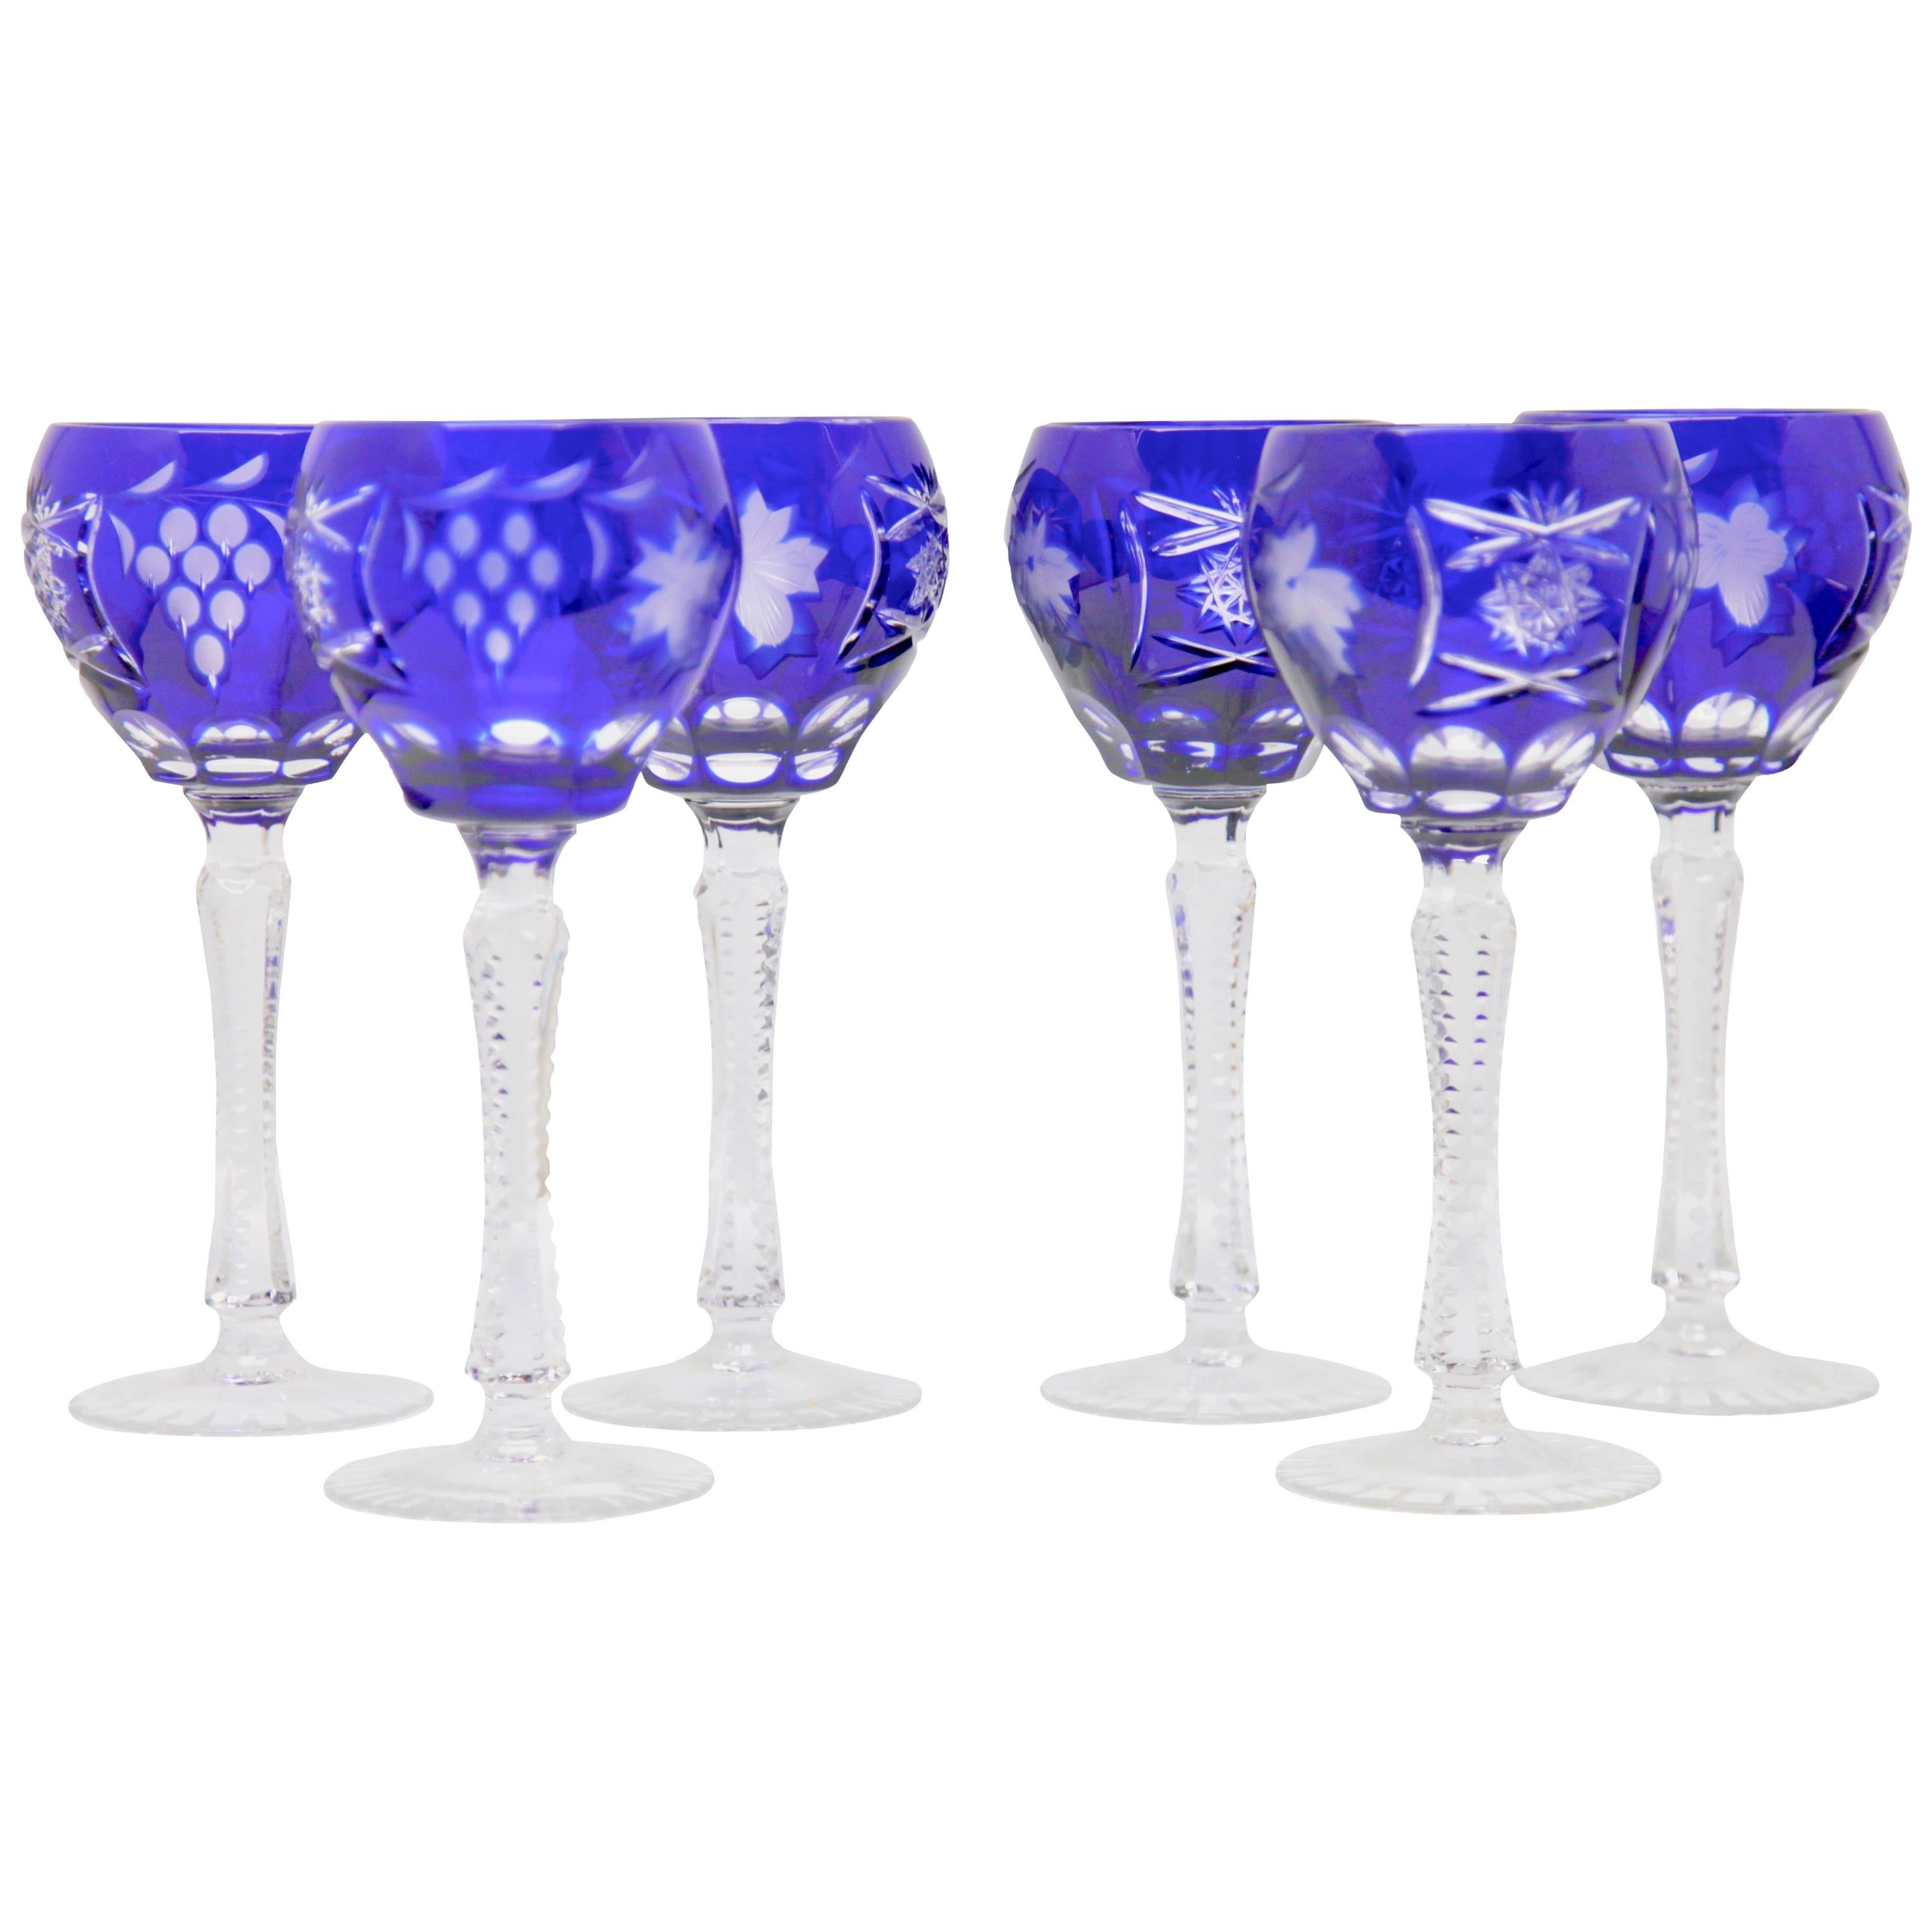 Set of 6 Stem Glasses Cobalt Blue with Colored Overlay Cut to Clear